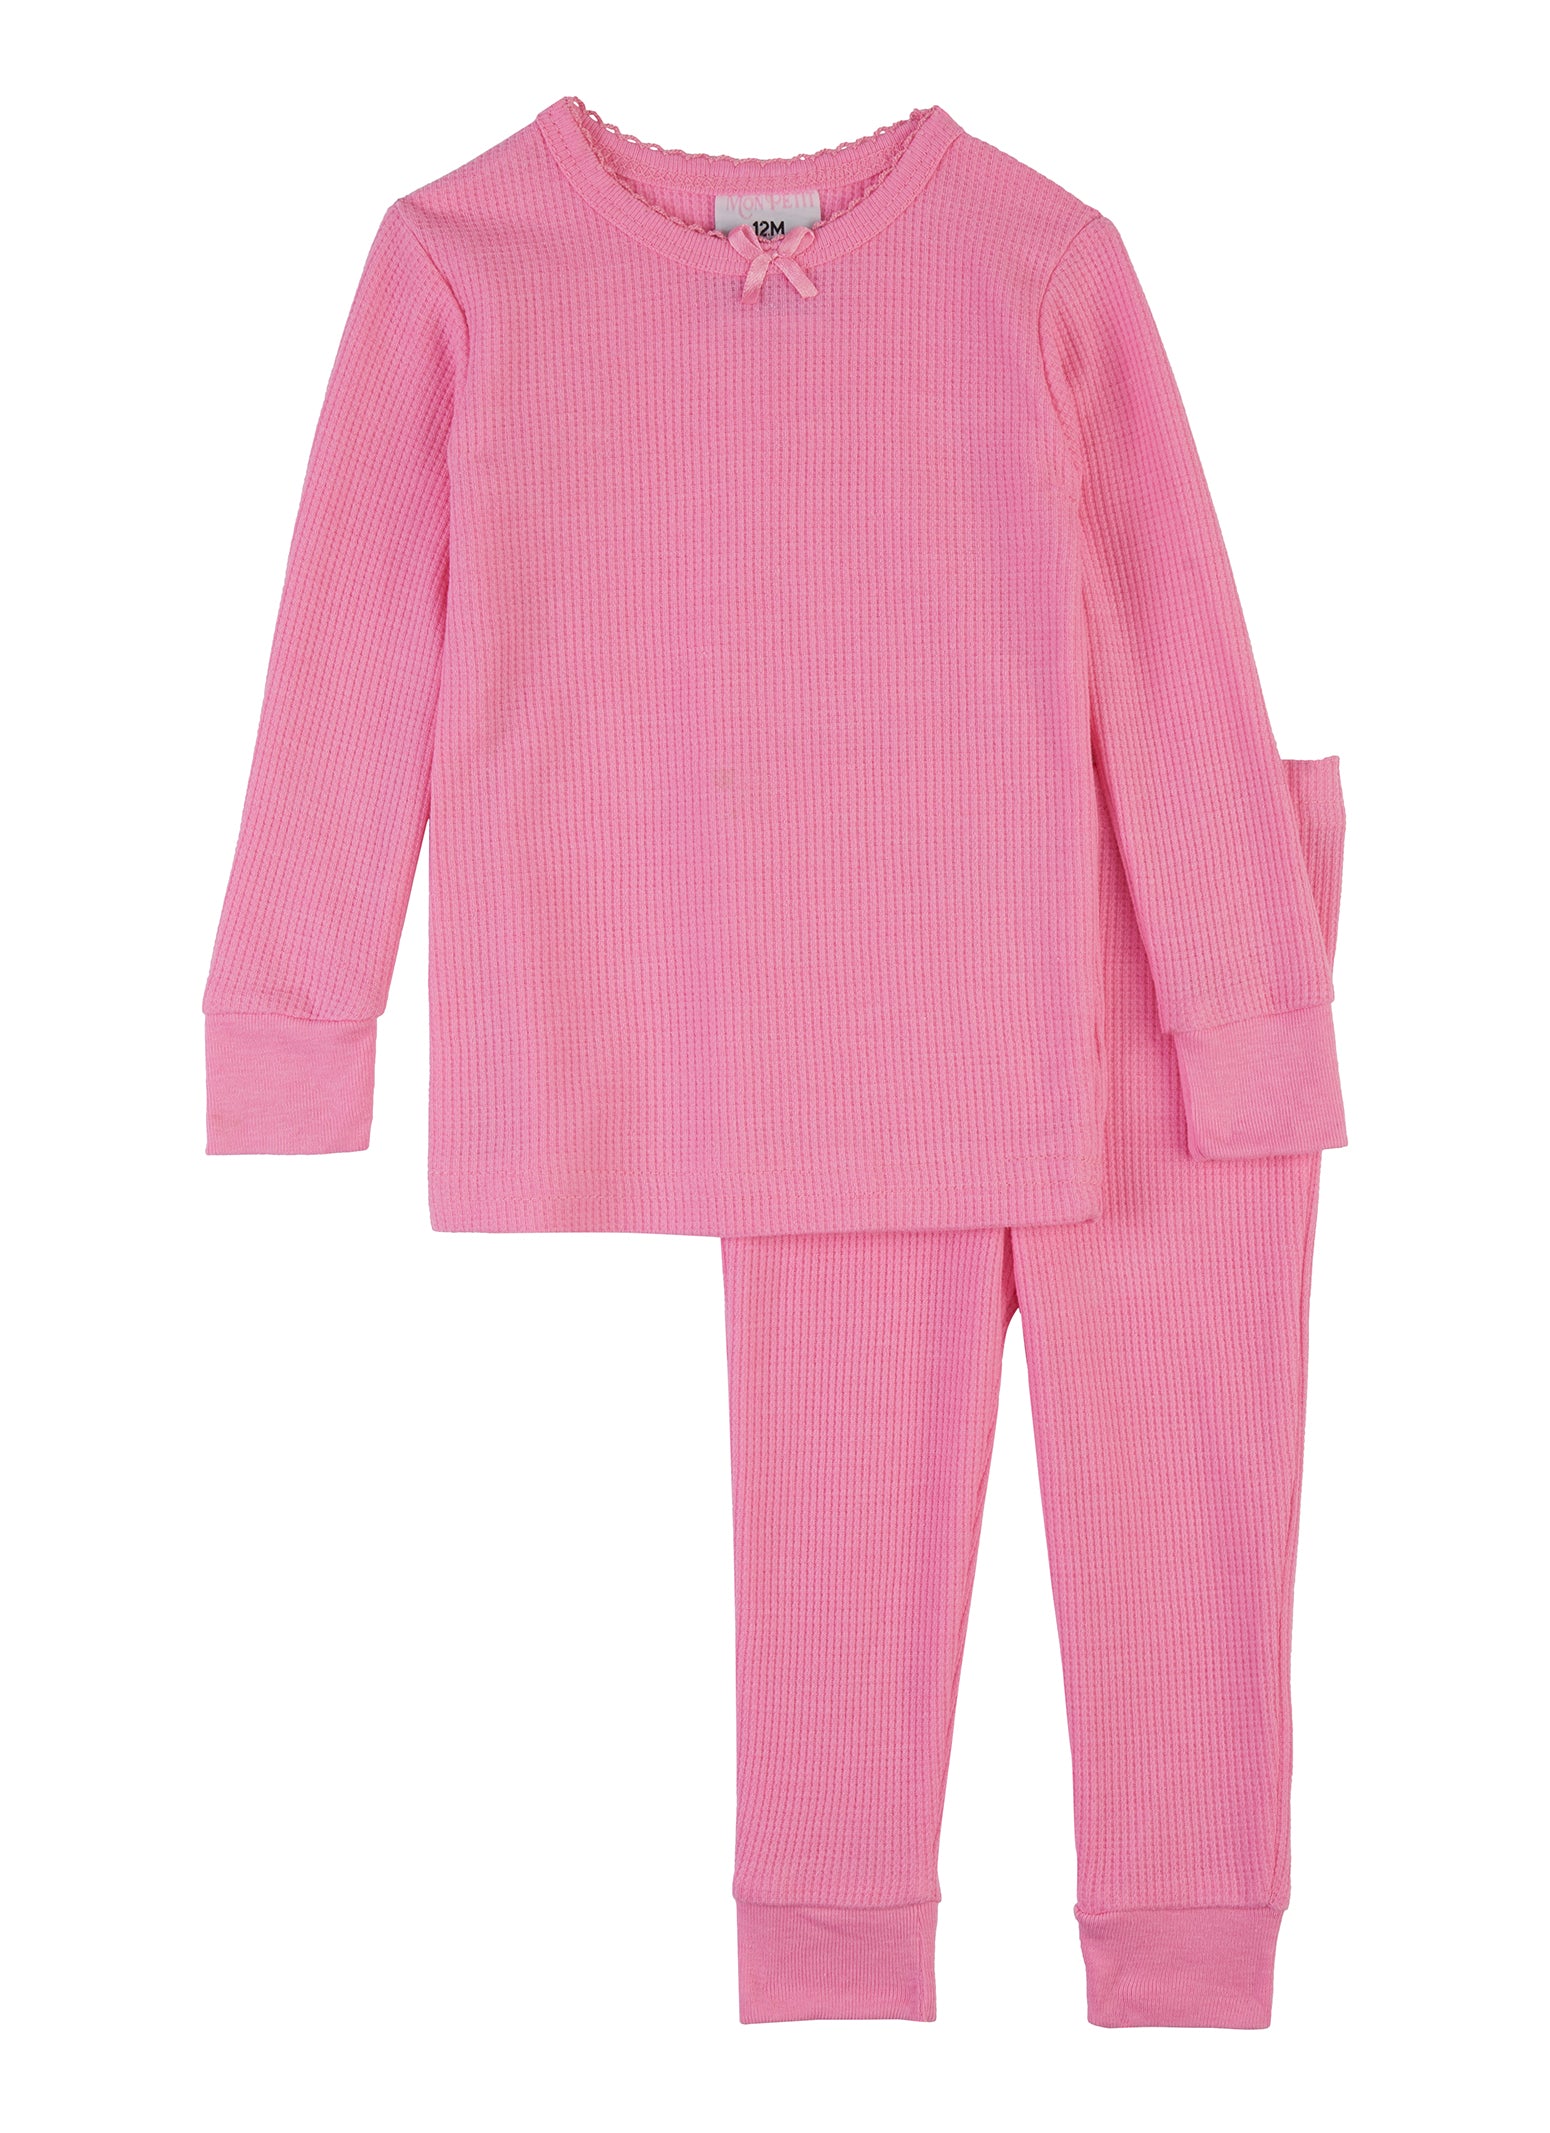 Baby Girls 12-24M Solid Thermal Top and Pants